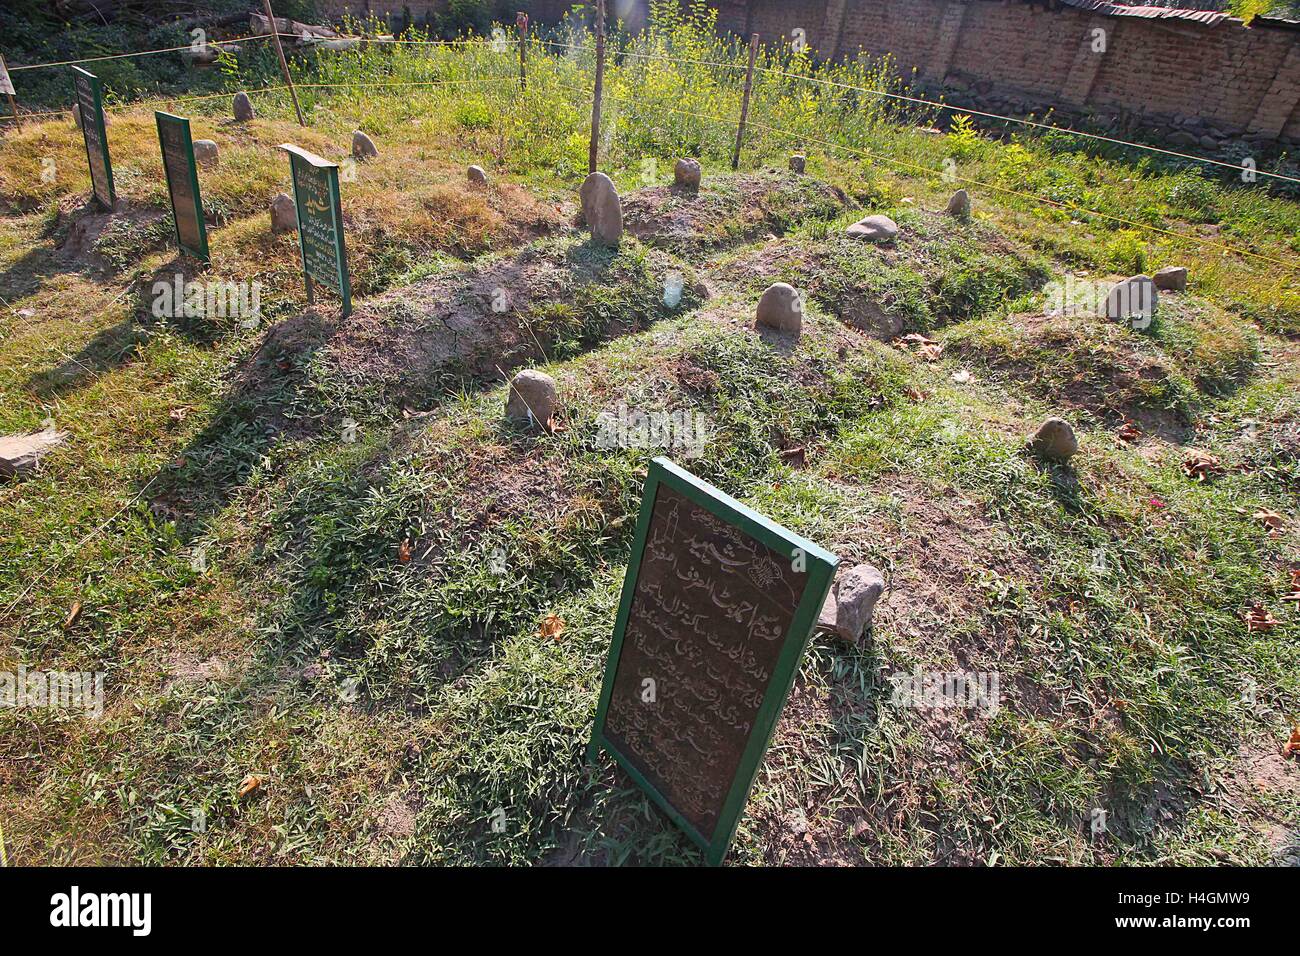 The martyrs graveyard where rebel commander Burhan Wani and other ...